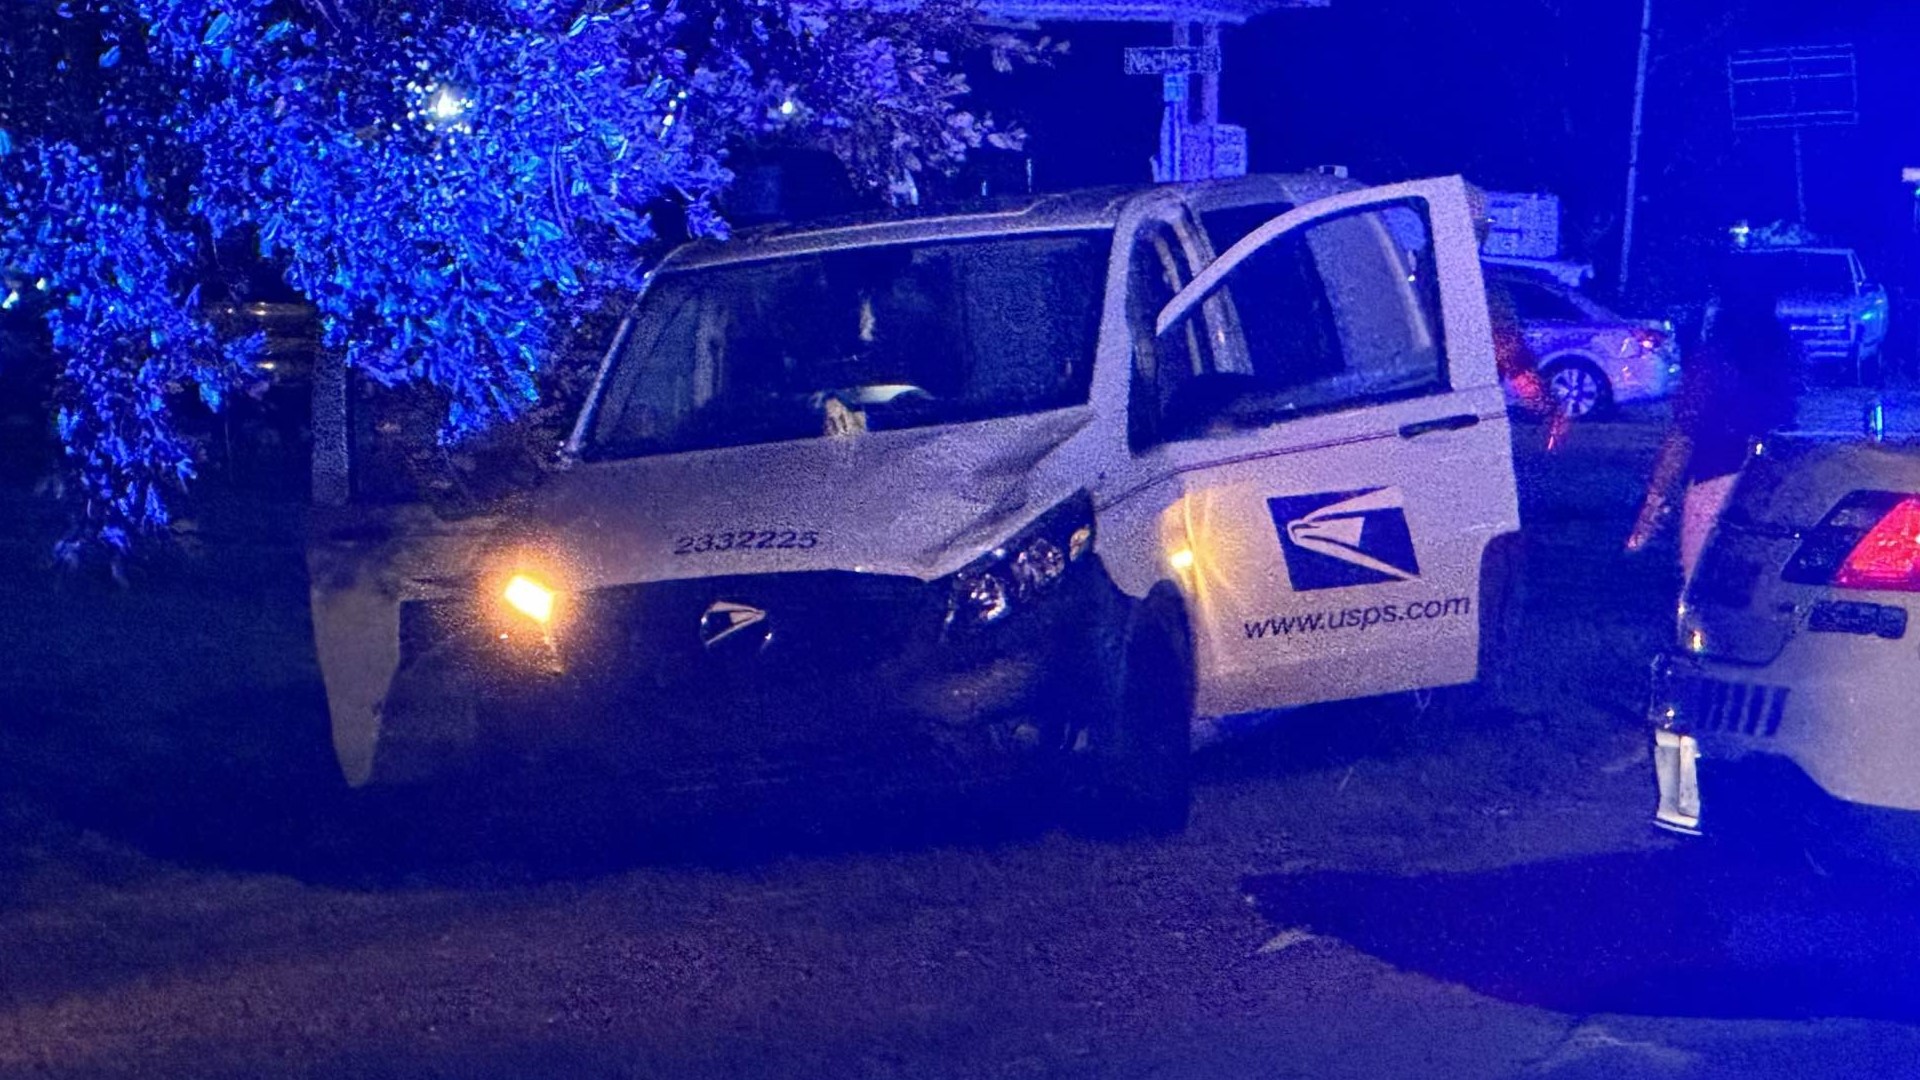 52 Year Old Woman Dies After Being Hit By Usps Vehicle In Port Arthur Monday Evening